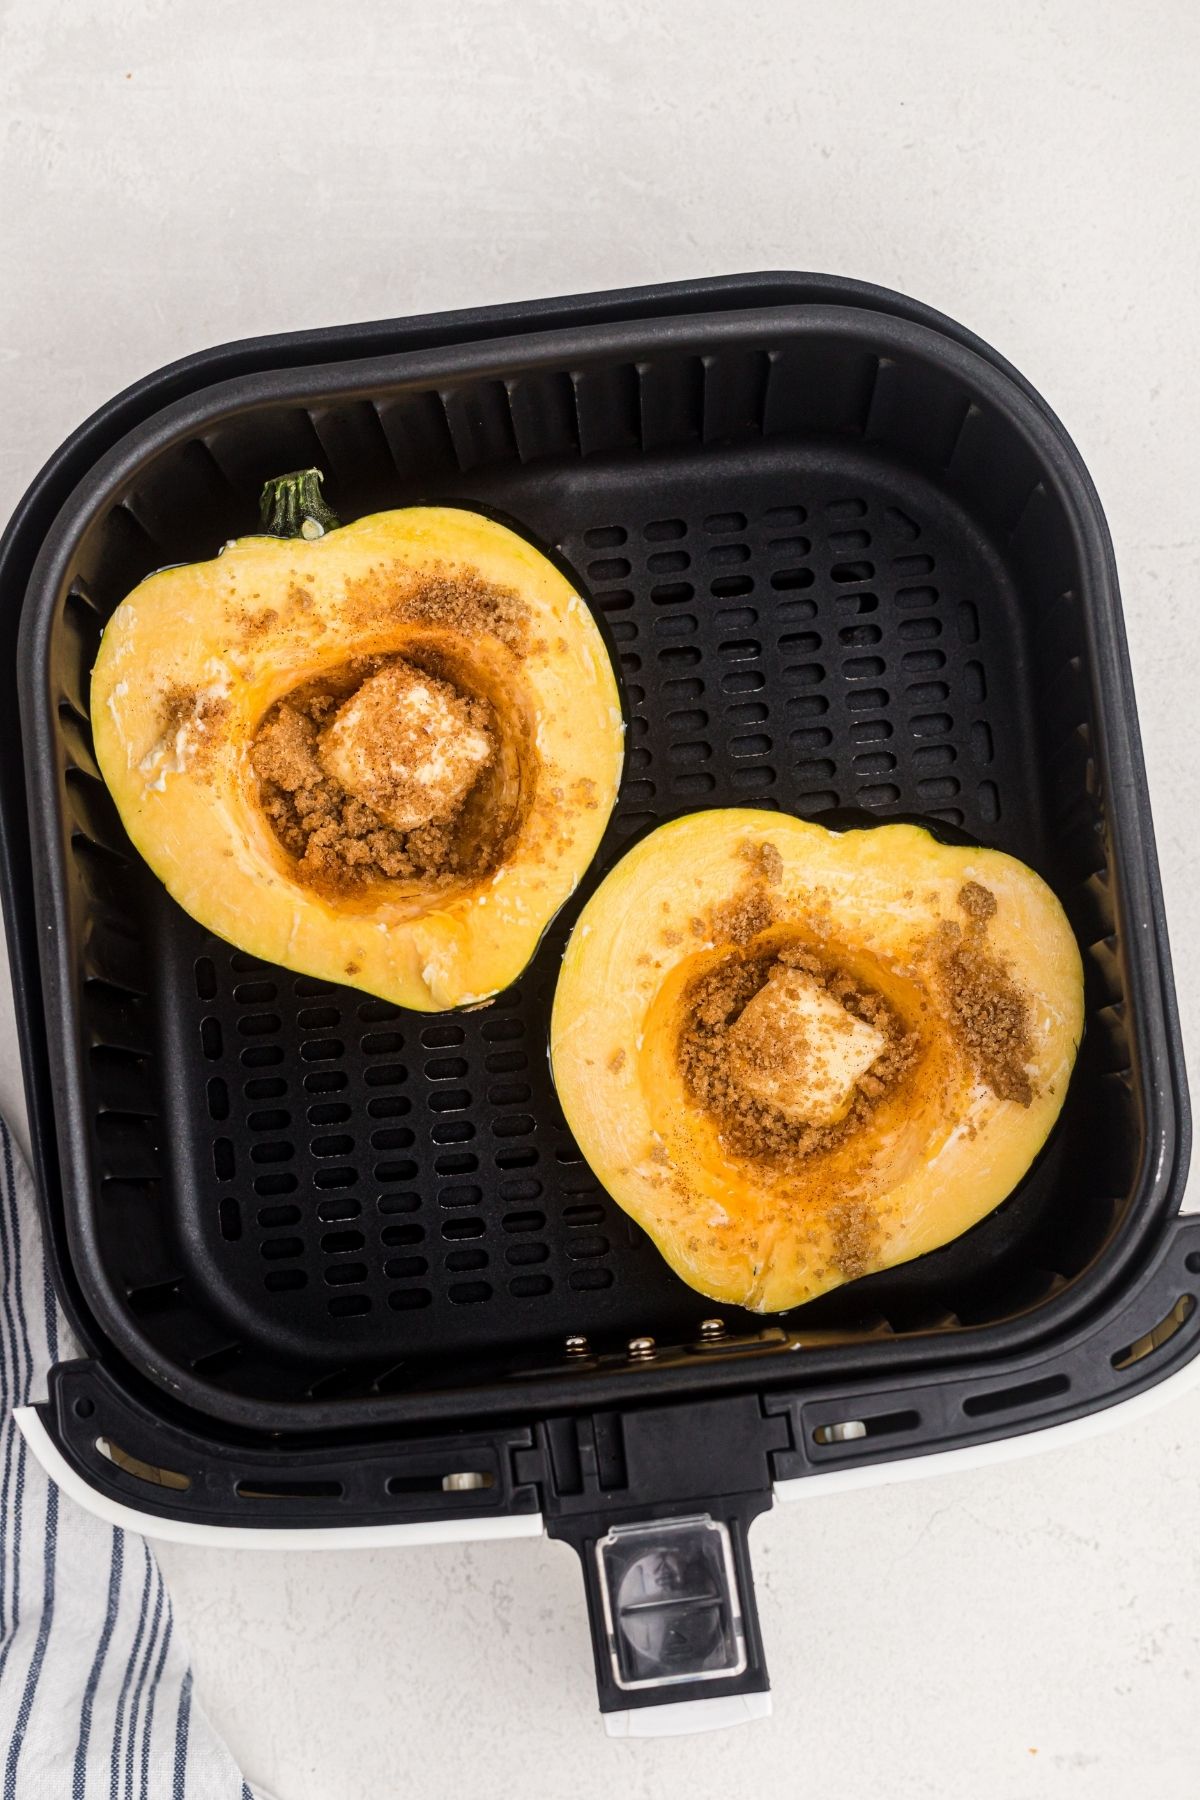 Acorn squash sliced in half filled with butter and brown sugar mixture in the air fryer basket before being cooked